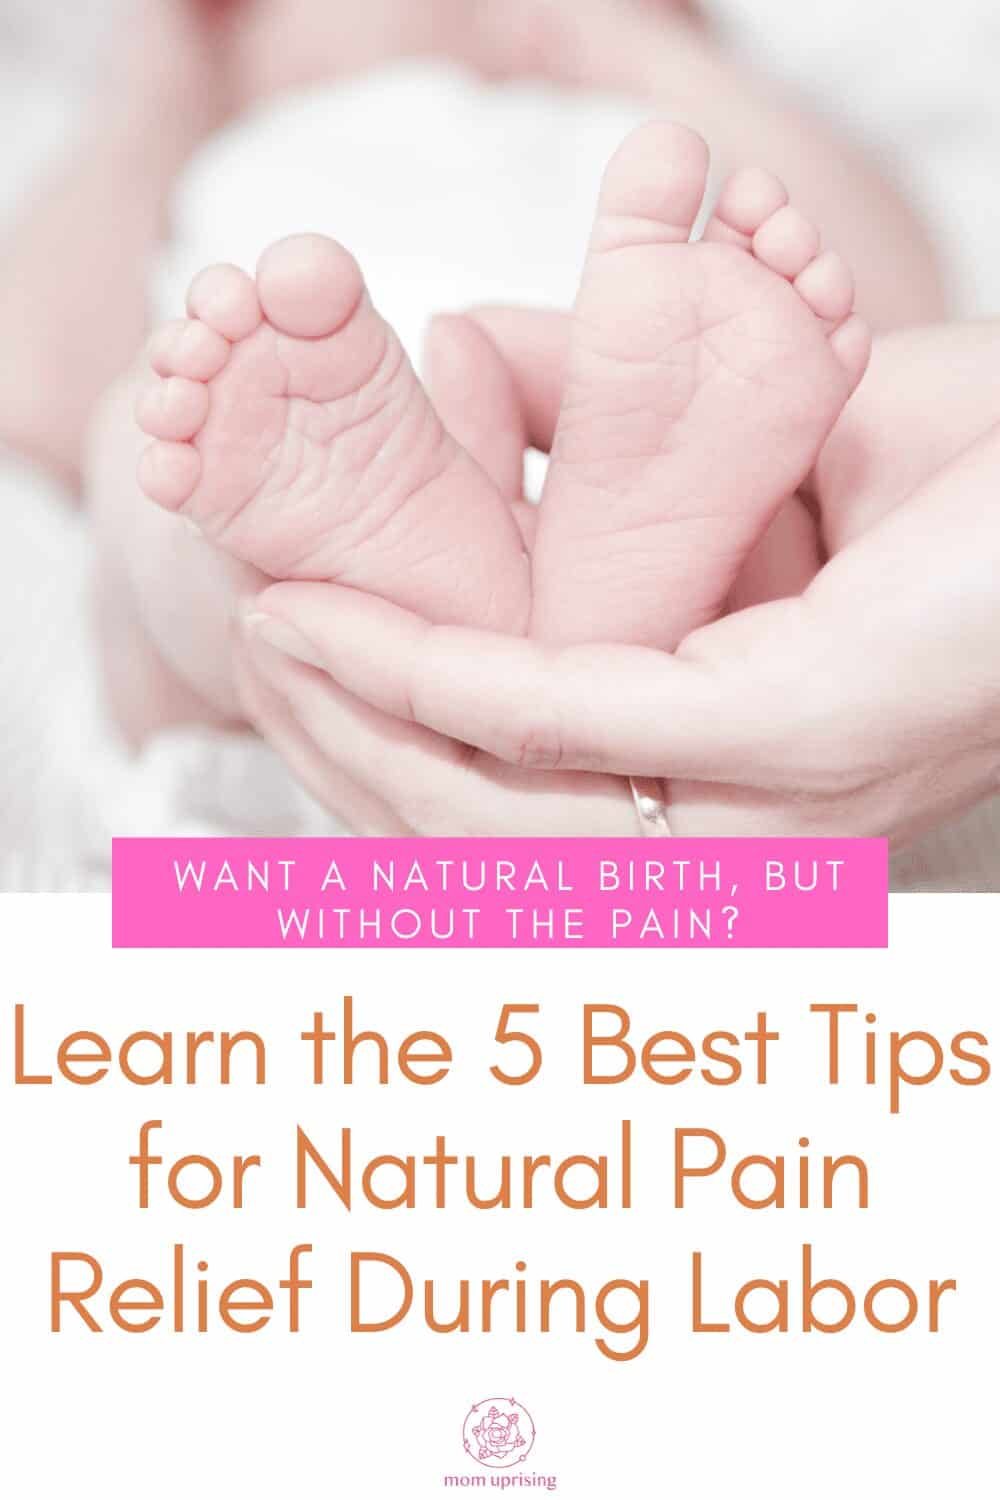 5 Tips for Natural Pain Relief During Labor that Work